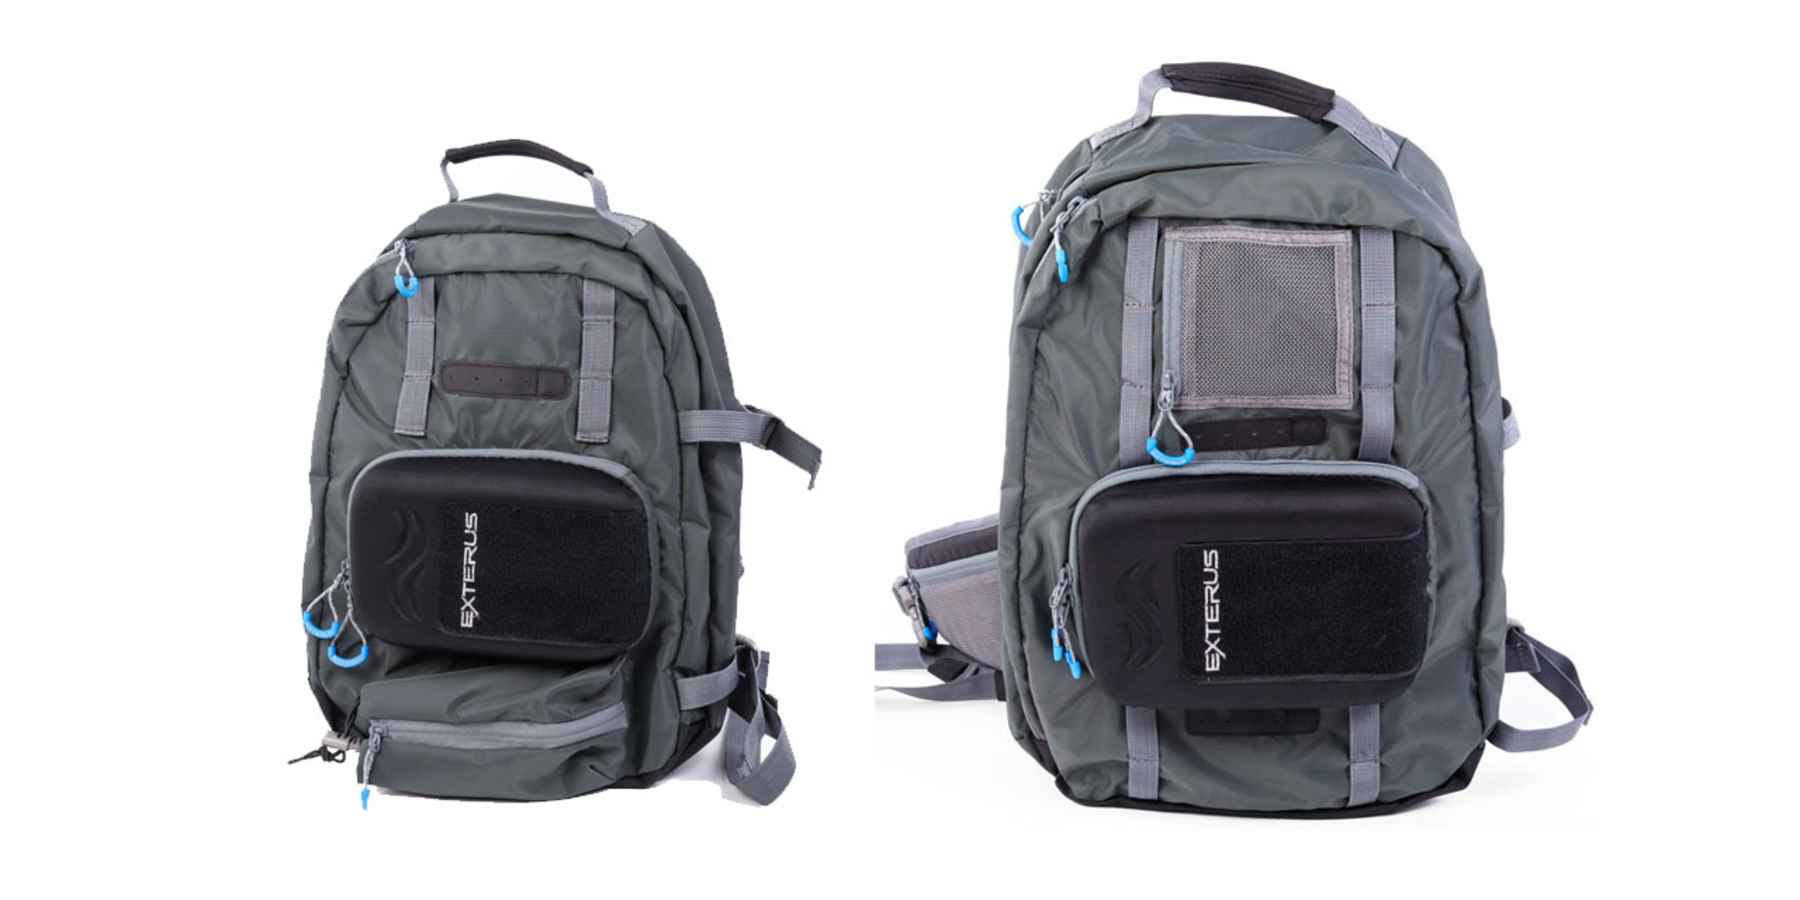 Allen Fly Fishing Introduces New Exterus Line of Bags and Packs